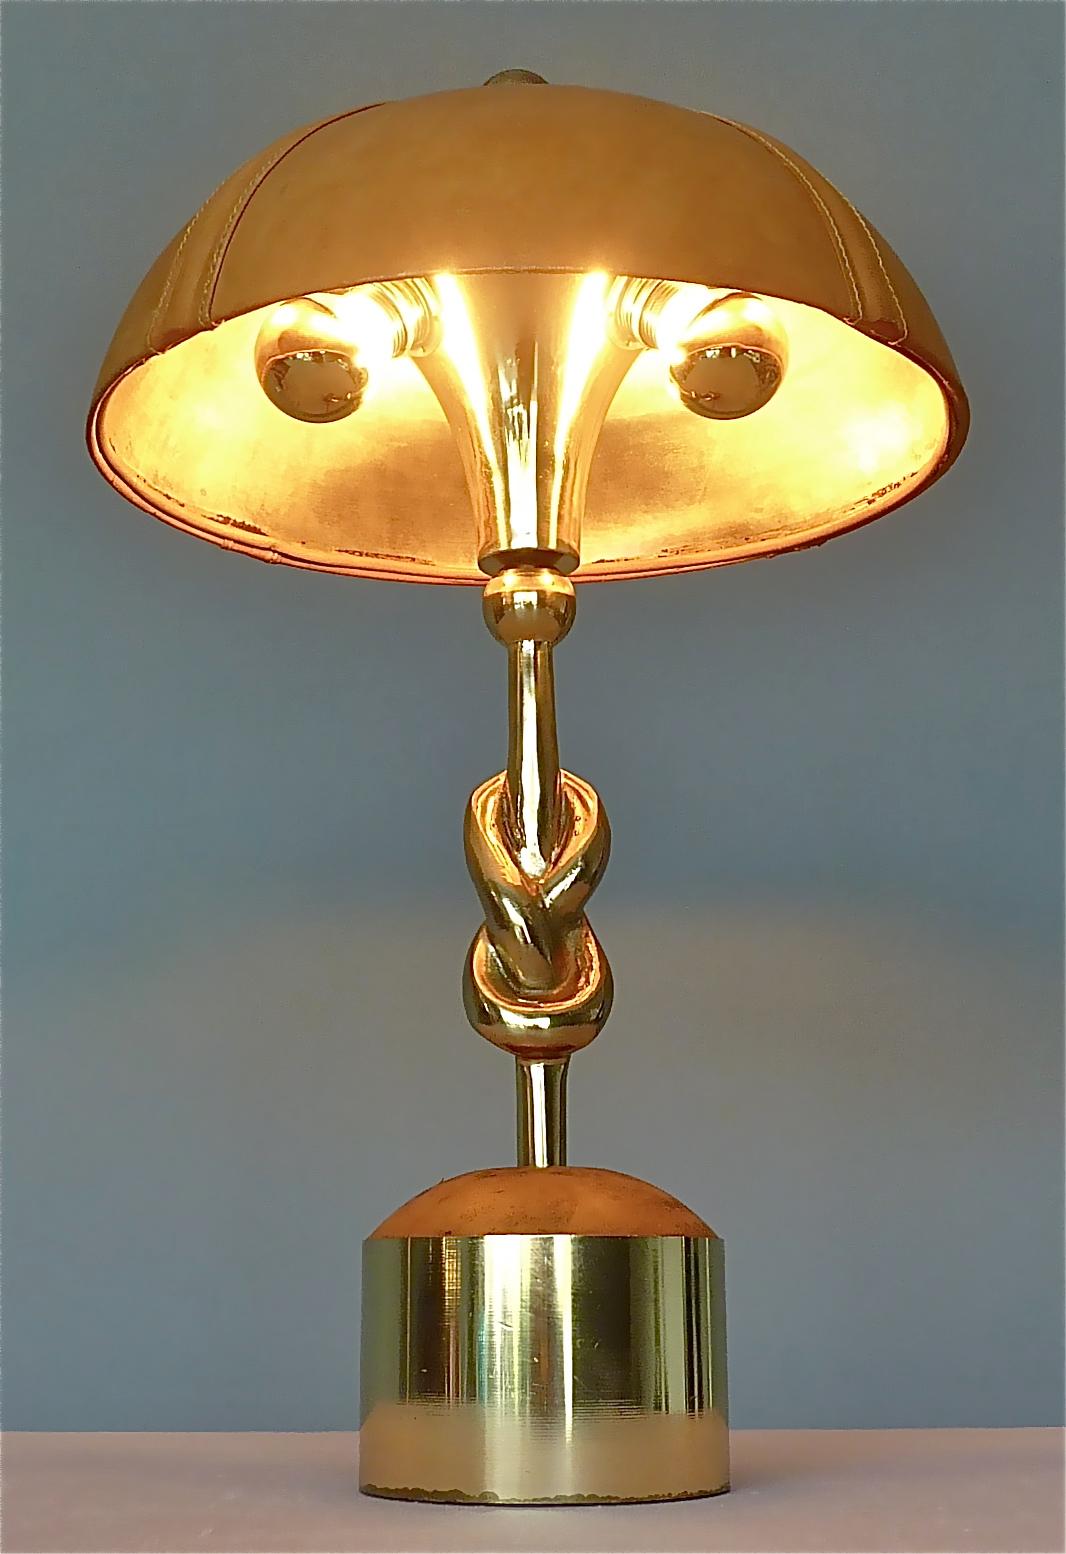 Sculptural Gilt Bronze Leather Knotted Table Lamp French 1970s Jansen Pergay Era For Sale 12